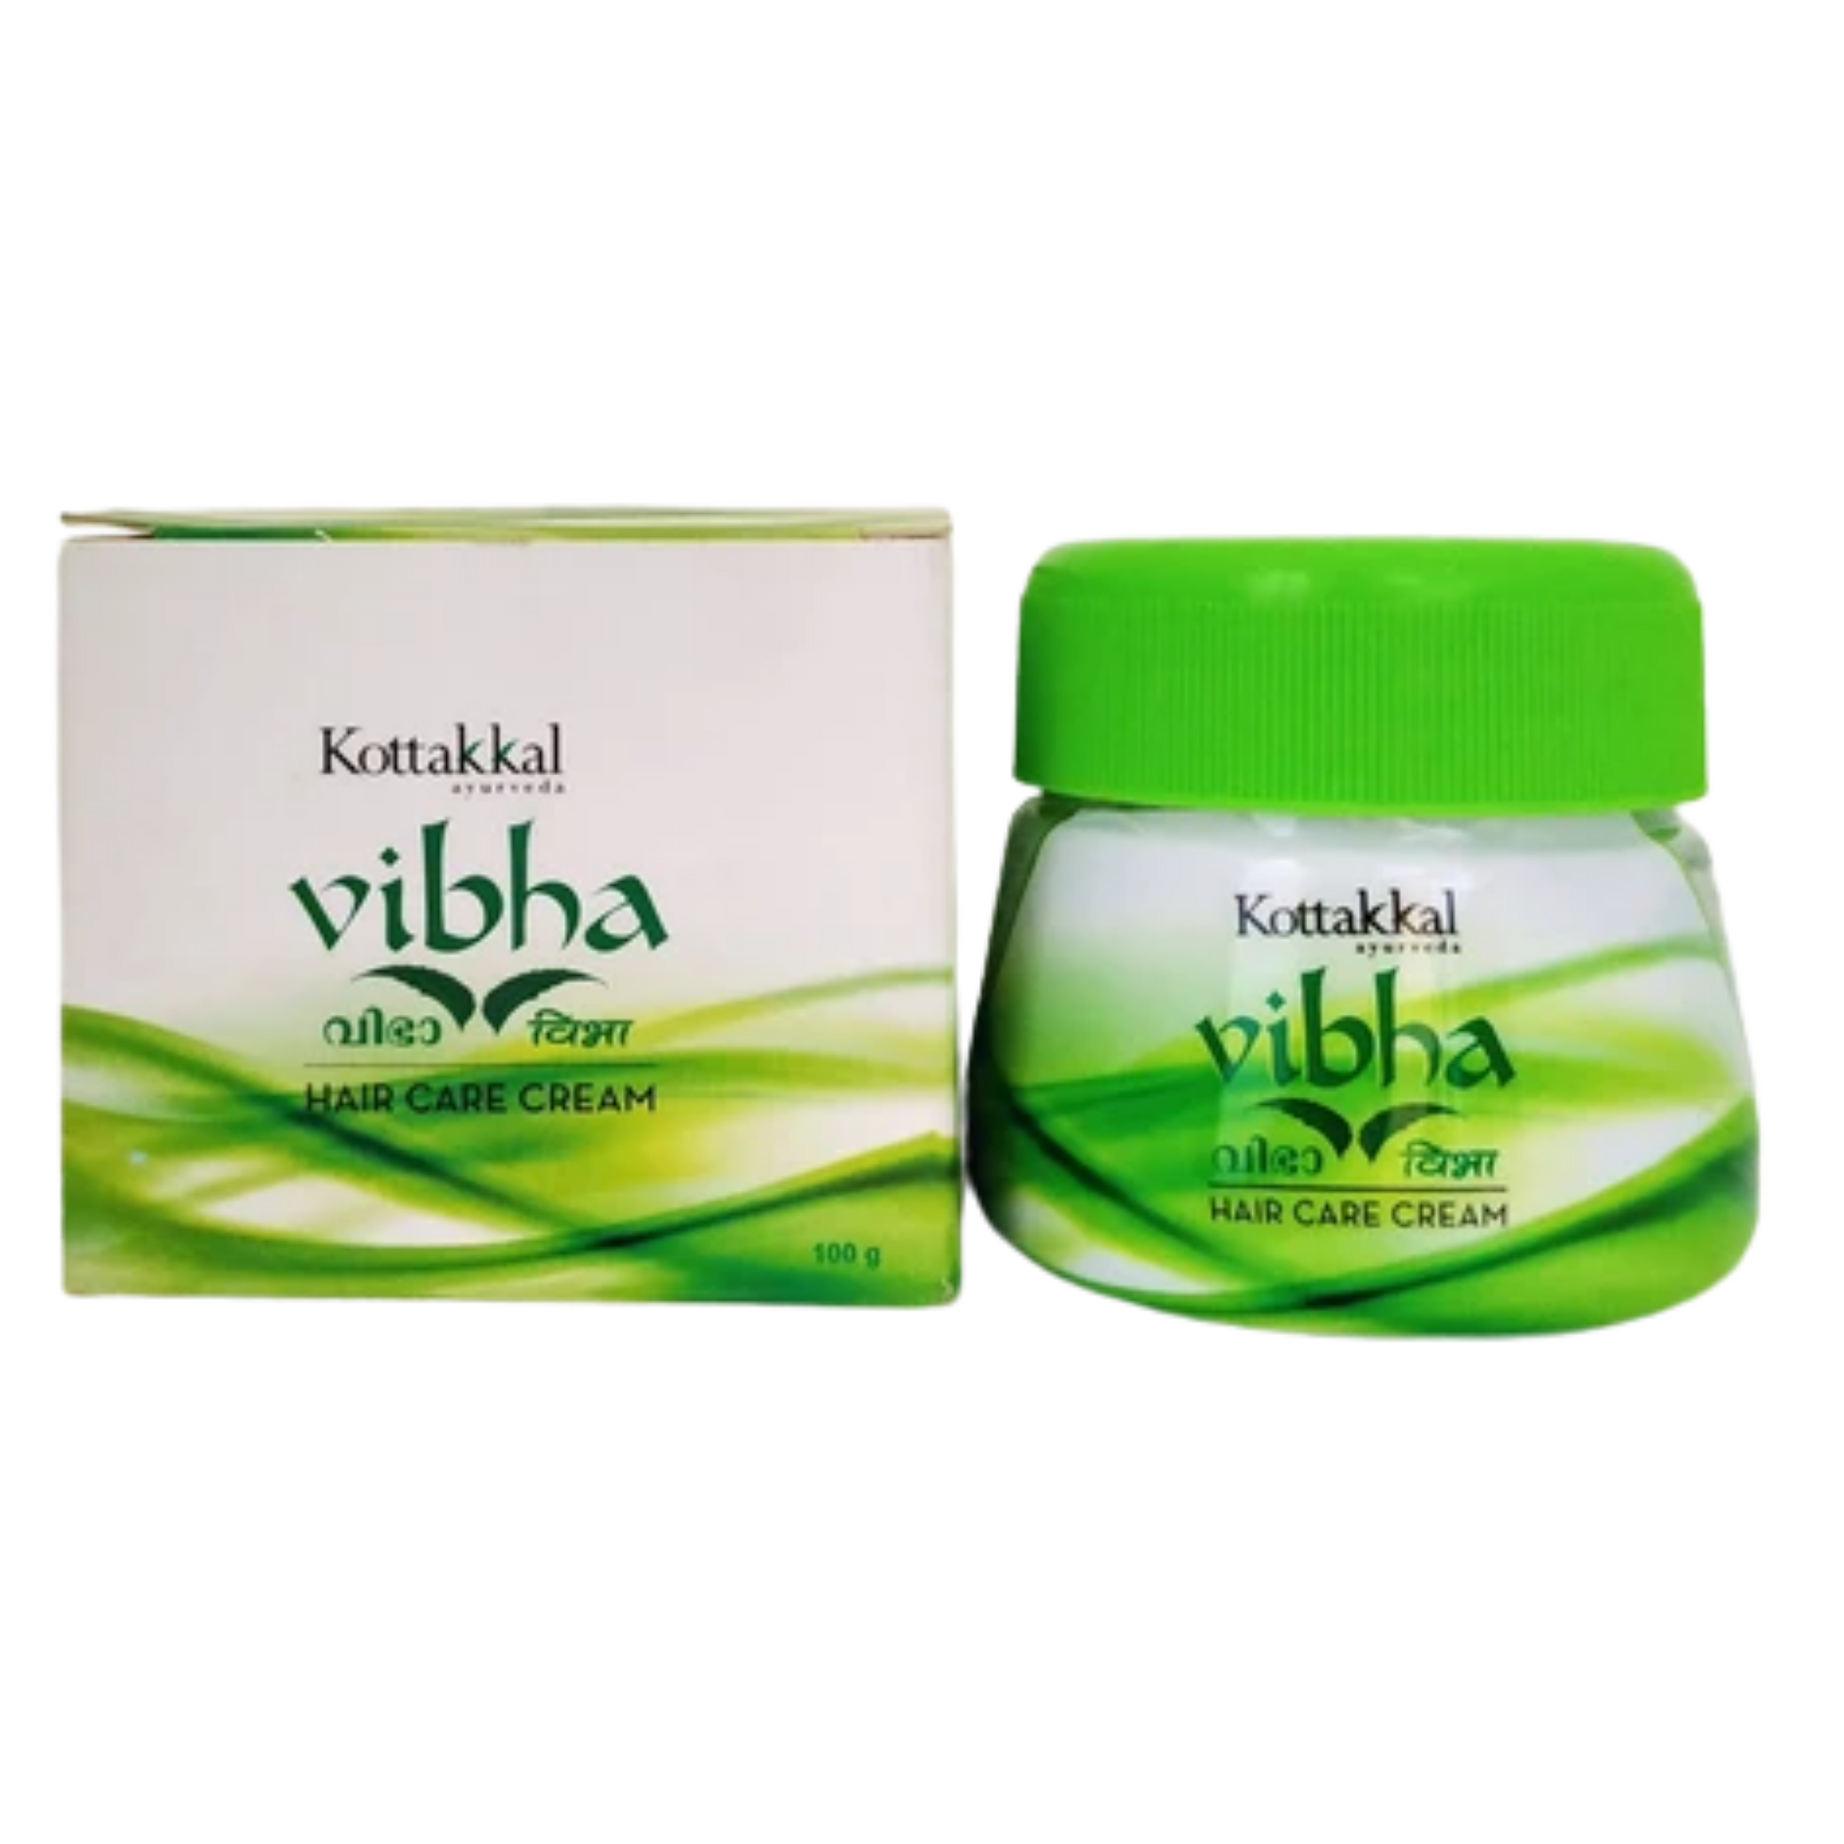 Shop Vibha Haircare cream 100gm at price 165.00 from Kottakkal Online - Ayush Care